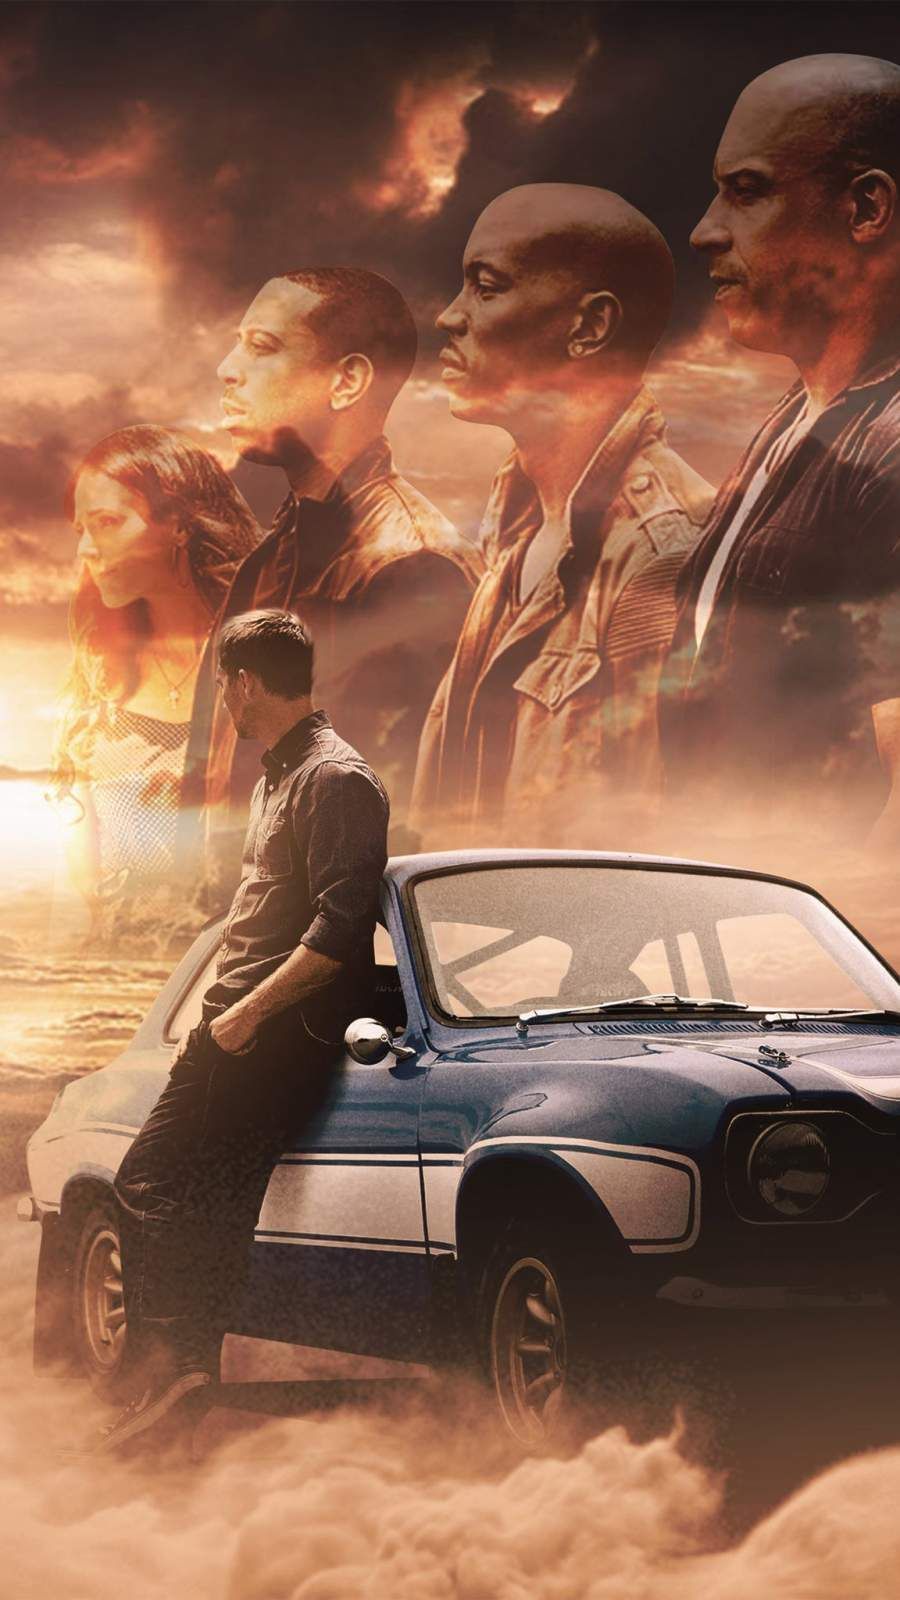 Fast and Furious iPhone Wallpaper. Fast and furious, Paul walker wallpaper, Movie fast and furious